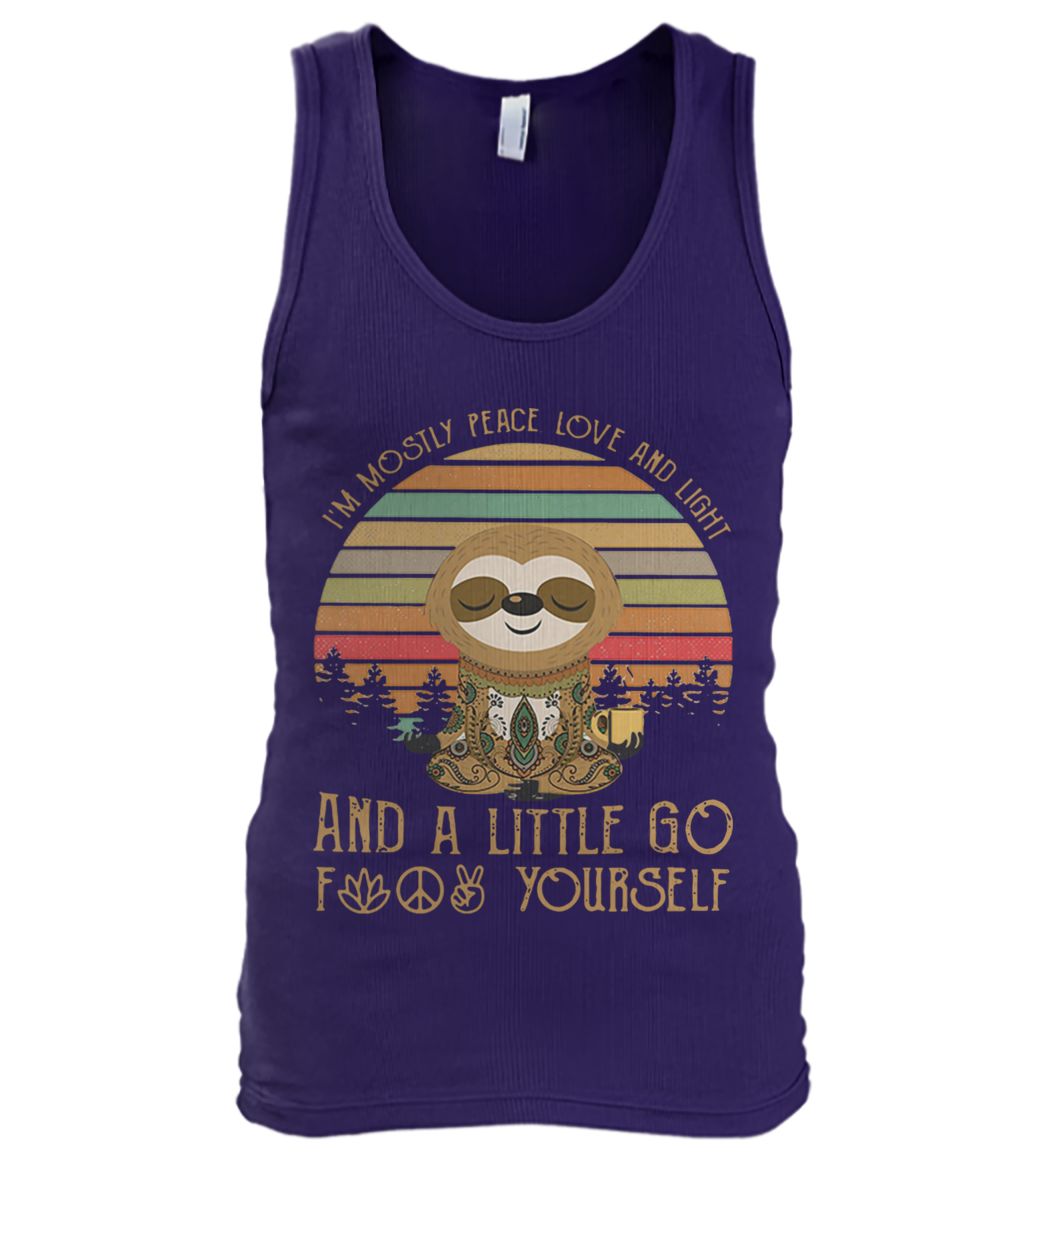 Sloth I’m mostly peace love and light and a little go fuck yourself vintage men's tank top